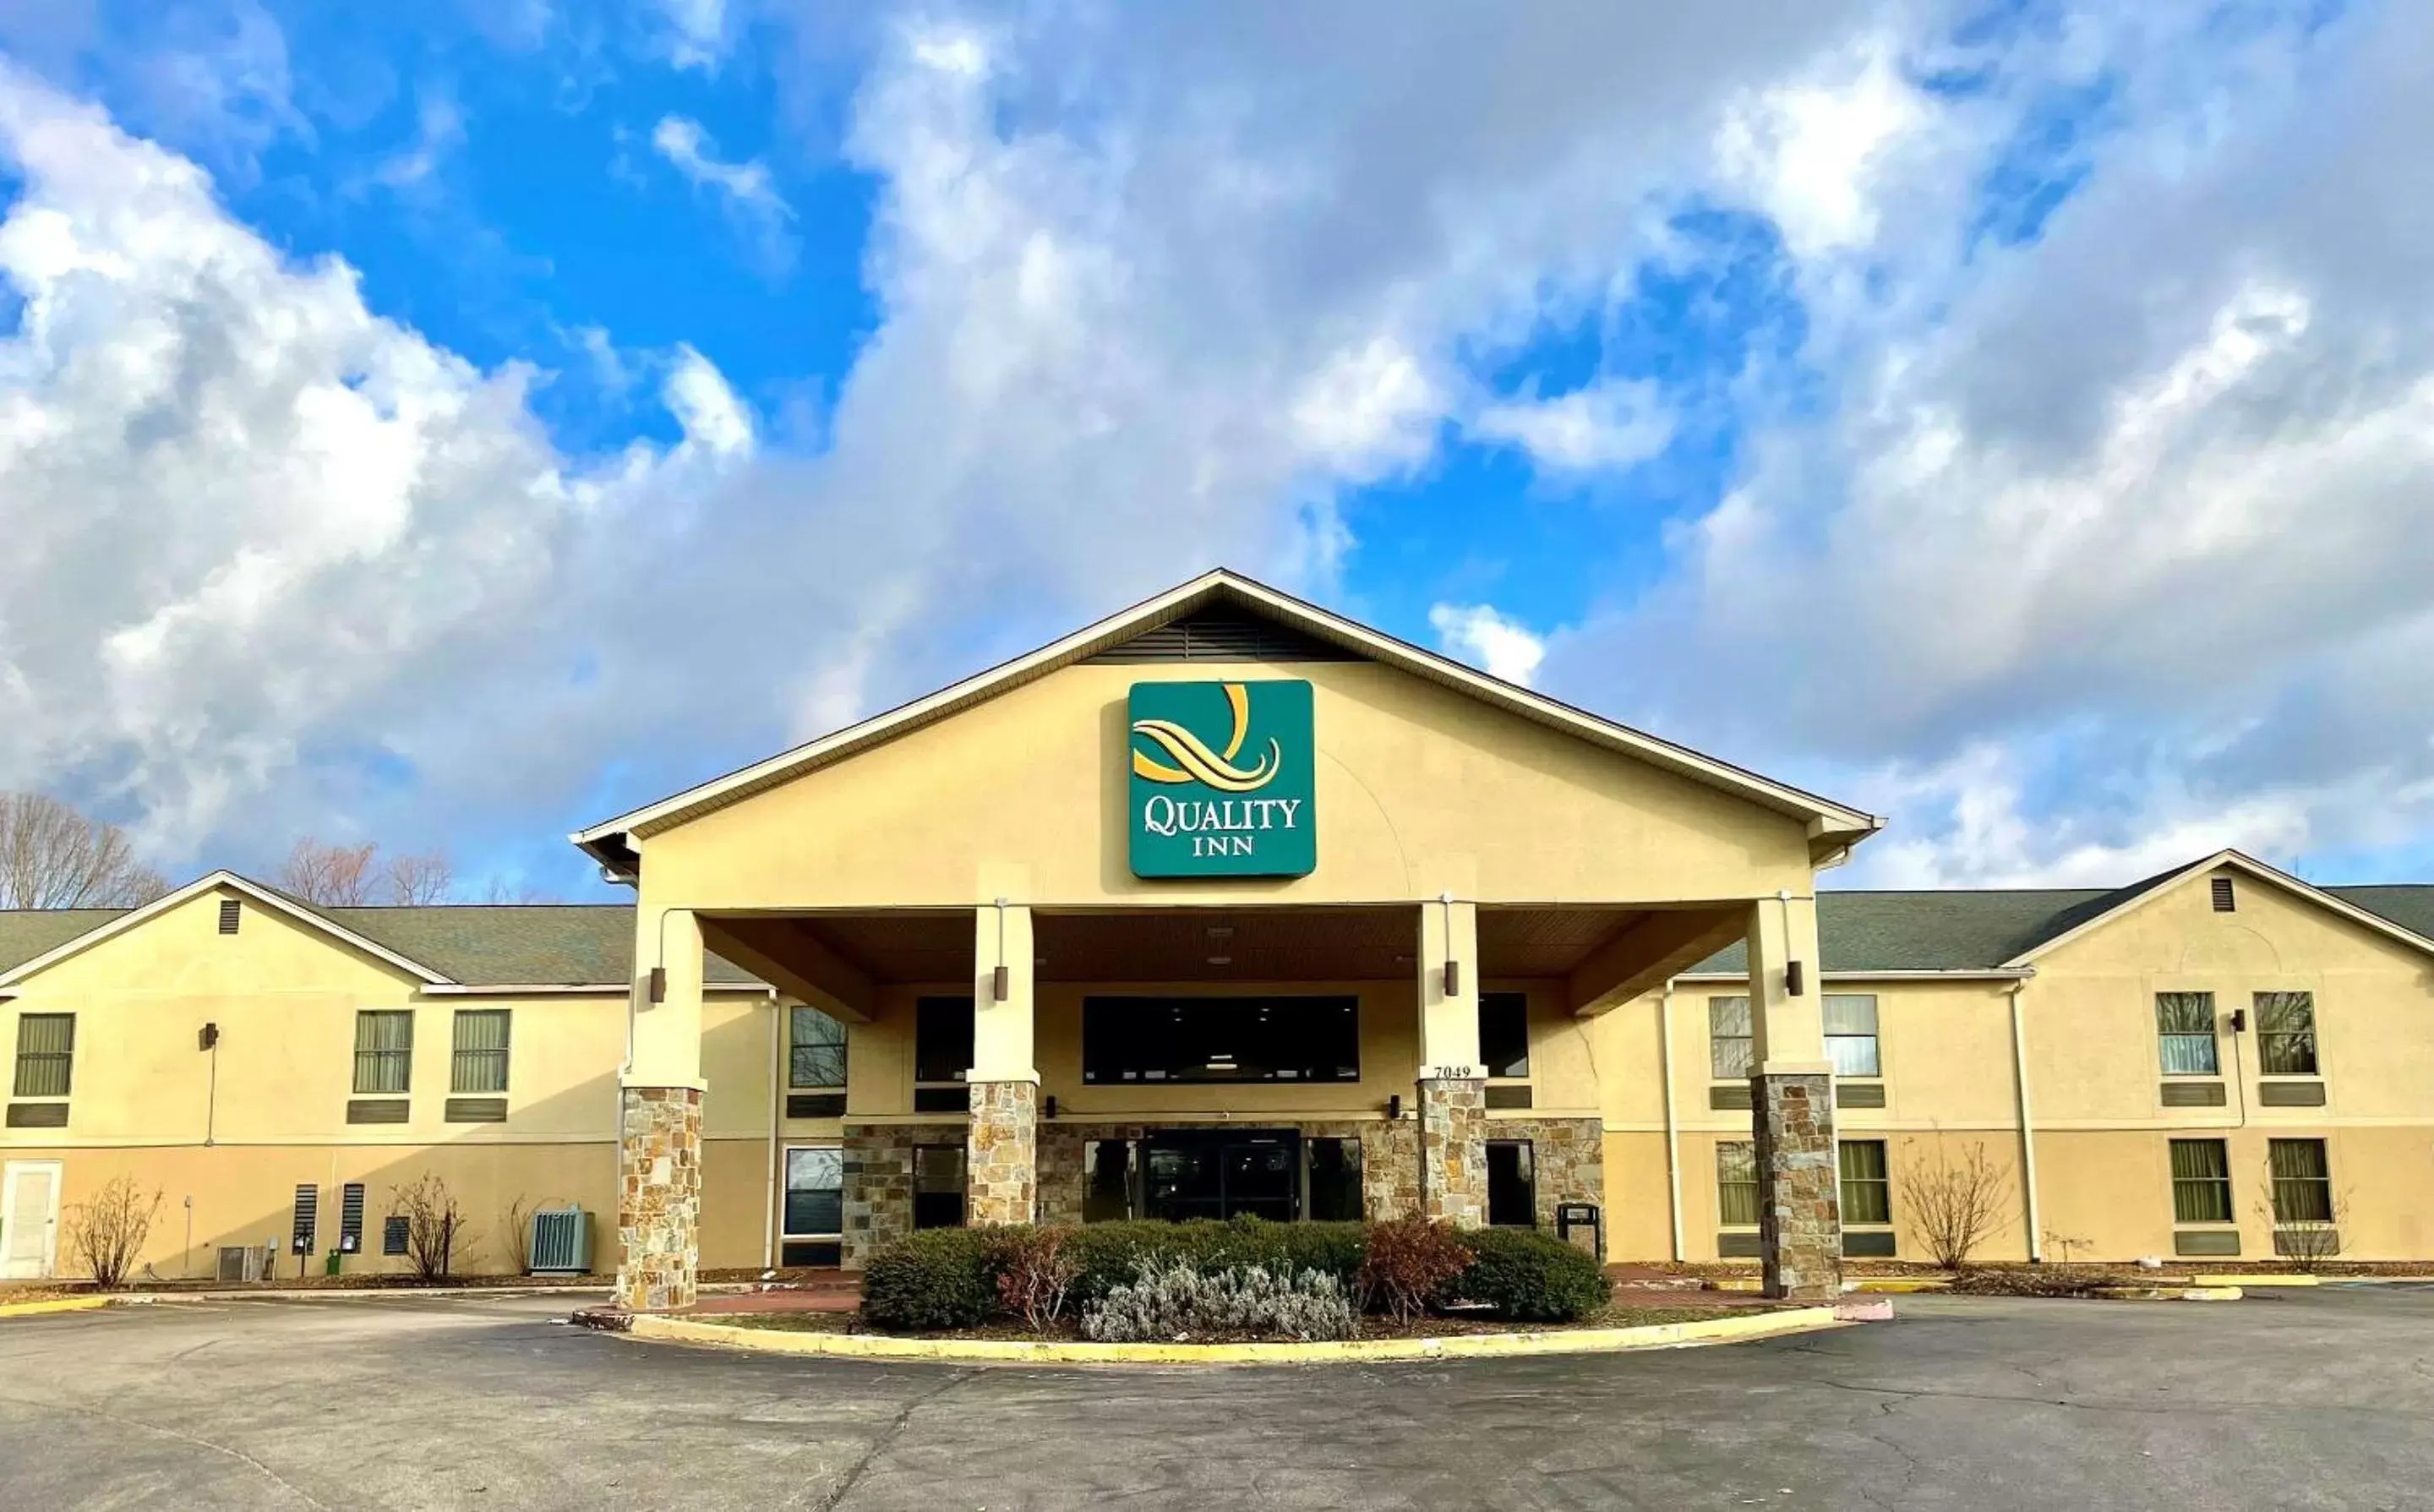 Property building in Quality Inn Olive Branch